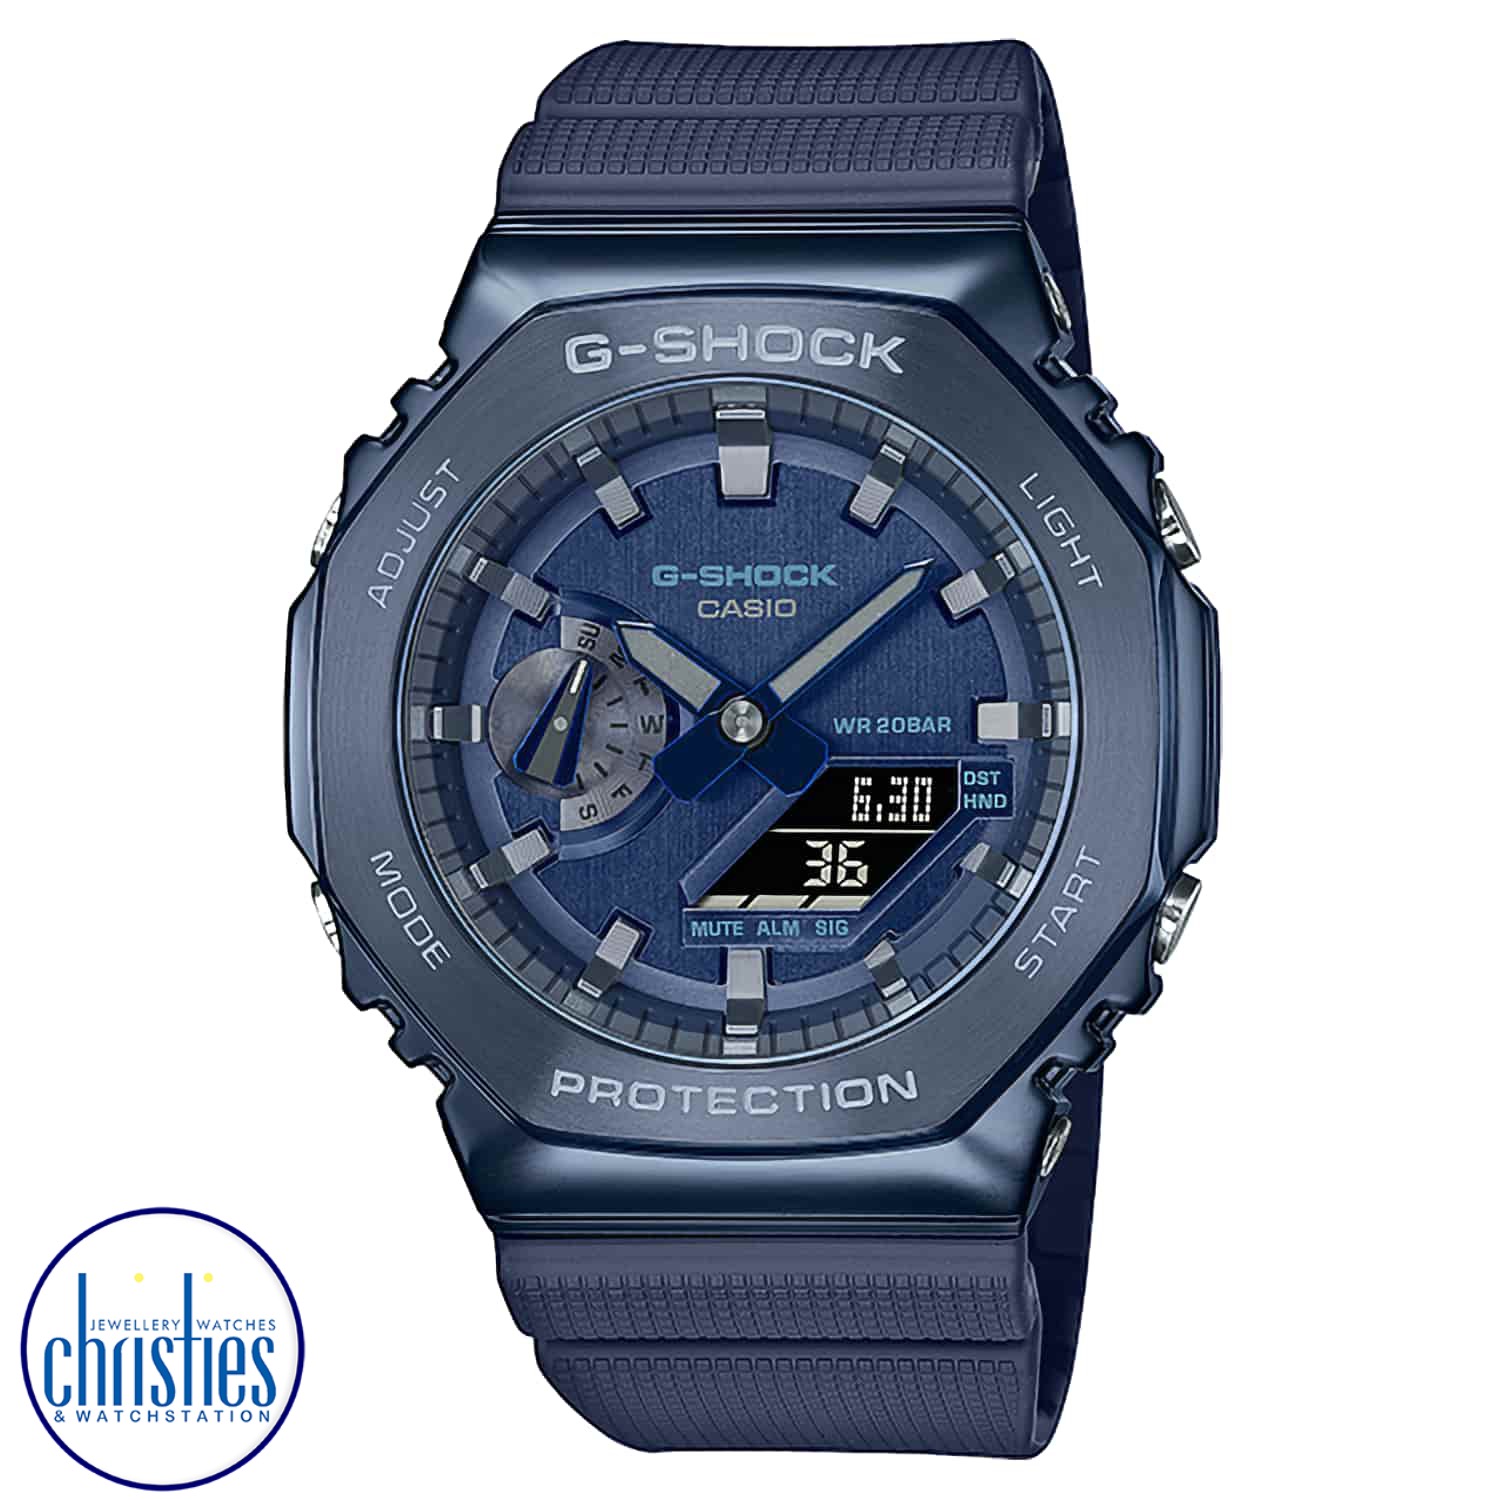 GM2100N-2A G-SHOCK Carbon Core Metal Clad Watch. Go sleek, sharp and bold with a G-SHOCK standard-bearer in a metal-clad octagonal take on the original iconic design. Forged in stainless steel with rounded hairline finish, the strong bezel says super styl